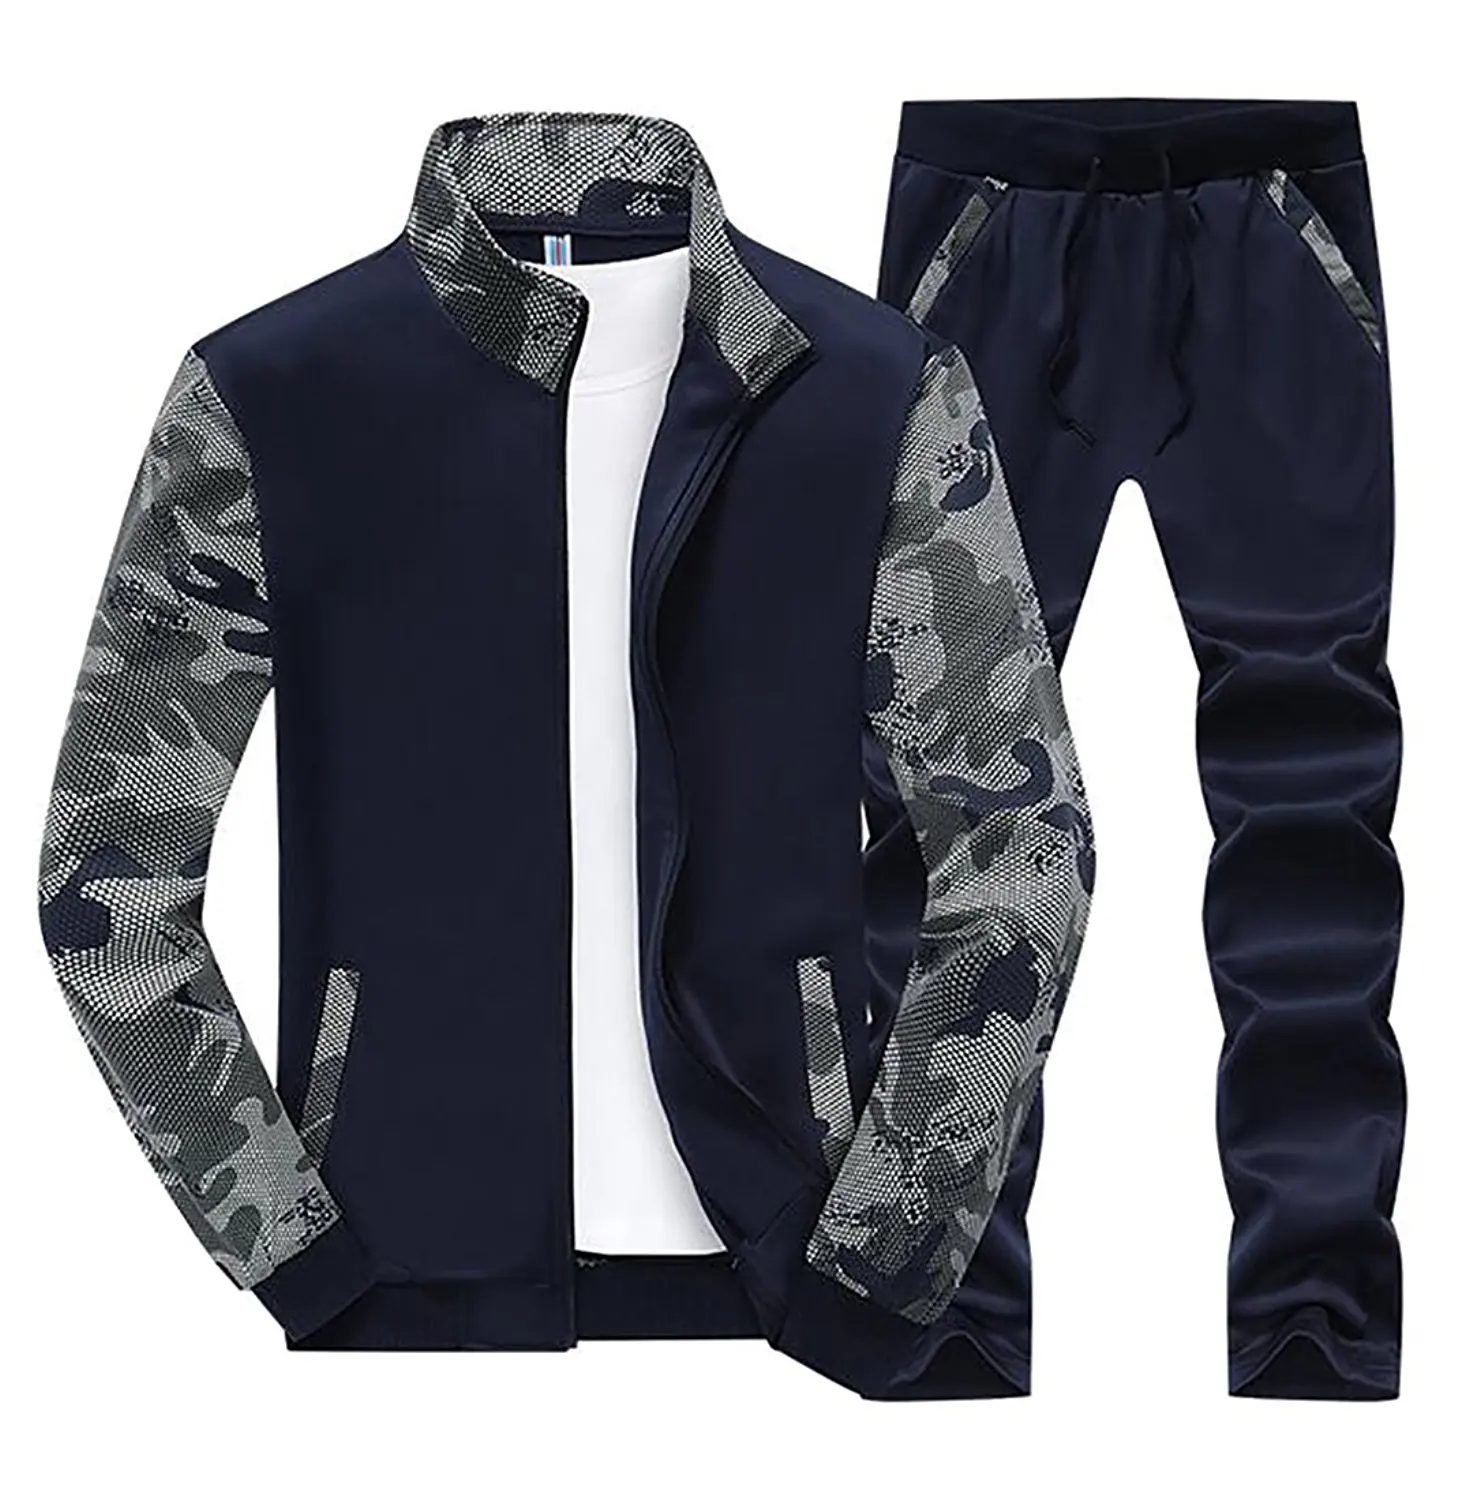 Cheap Camo Tracksuit, find Camo Tracksuit deals on line at Alibaba.com